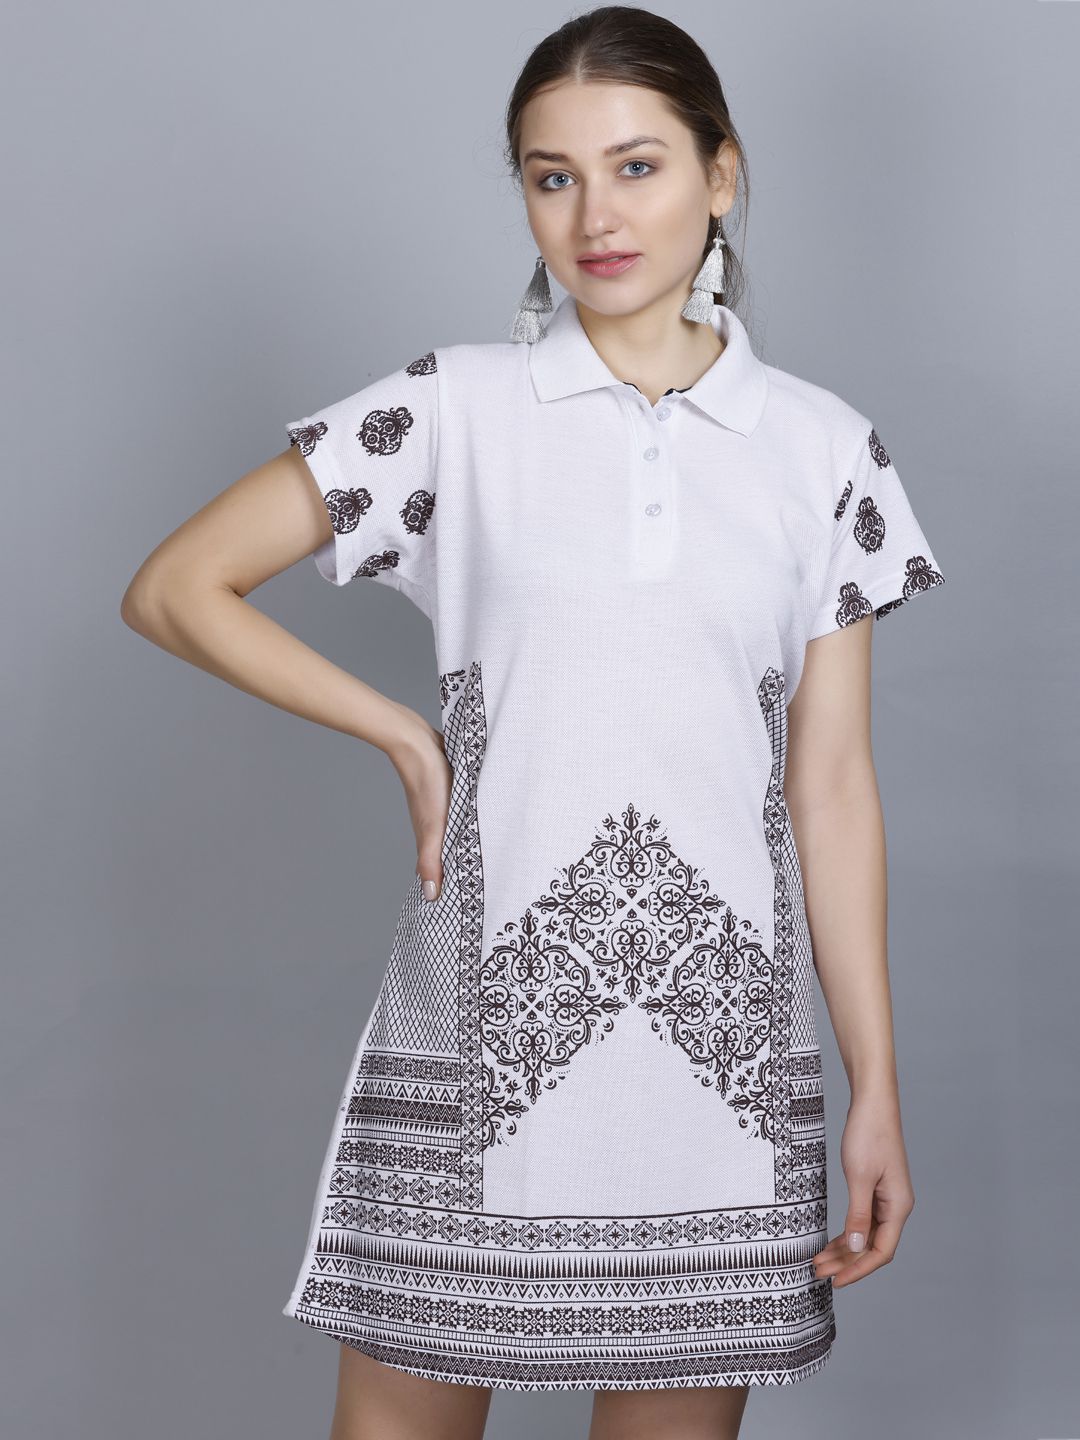     			OBAAN Cotton Blend Printed Above Knee Women's T-shirt Dress - White ( Pack of 1 )